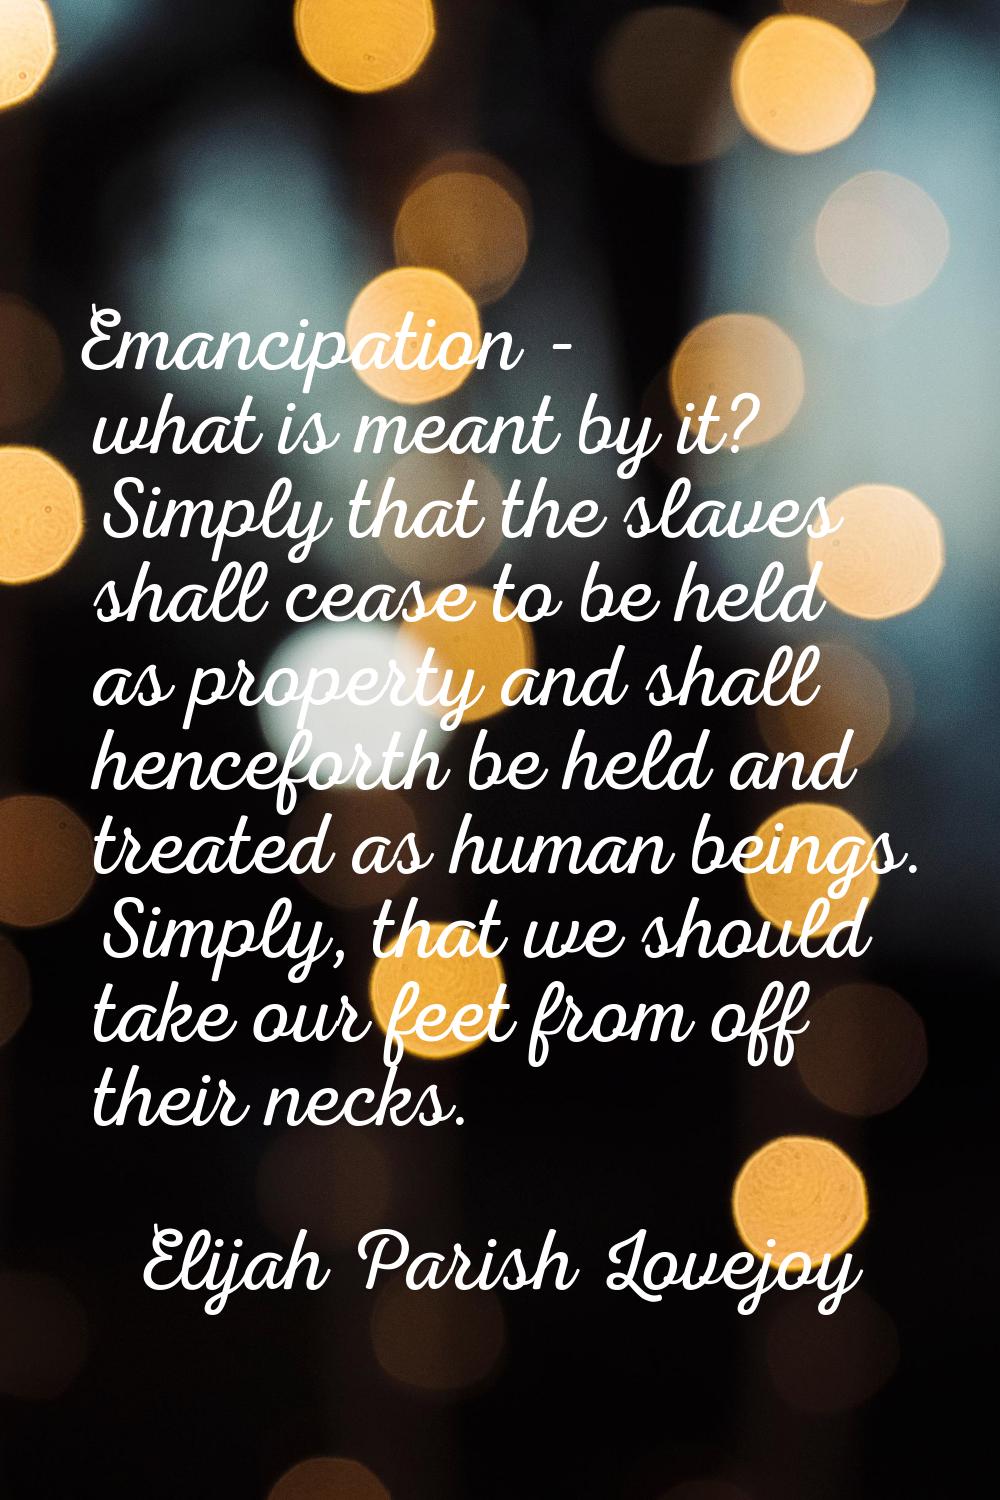 Emancipation - what is meant by it? Simply that the slaves shall cease to be held as property and s